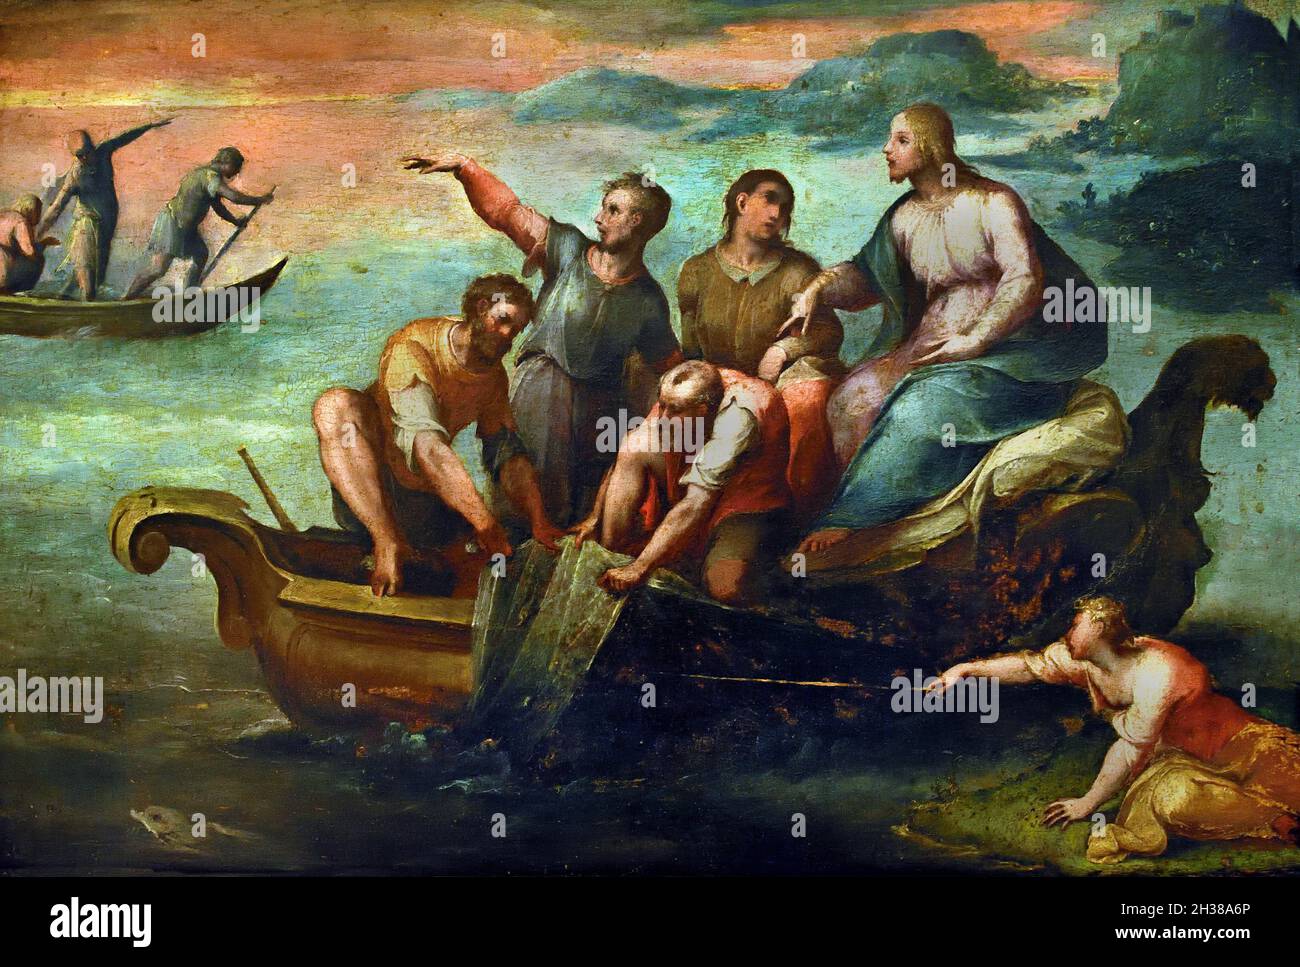 La Pesca Miracolosa - The Miraculous Fishing  16th Century, unknown painter, Italy, Italian,  ( The Miraculous catch of fish or more traditionally the Miraculous Draught of Fish(es), is either of two miracles attributed to Jesus in the canonical gospels.apostles are fishing unsuccessfully in the Sea of Galilee when Jesus tells them to try one more cast of the net, at which they are rewarded with a great catch. ) Stock Photo